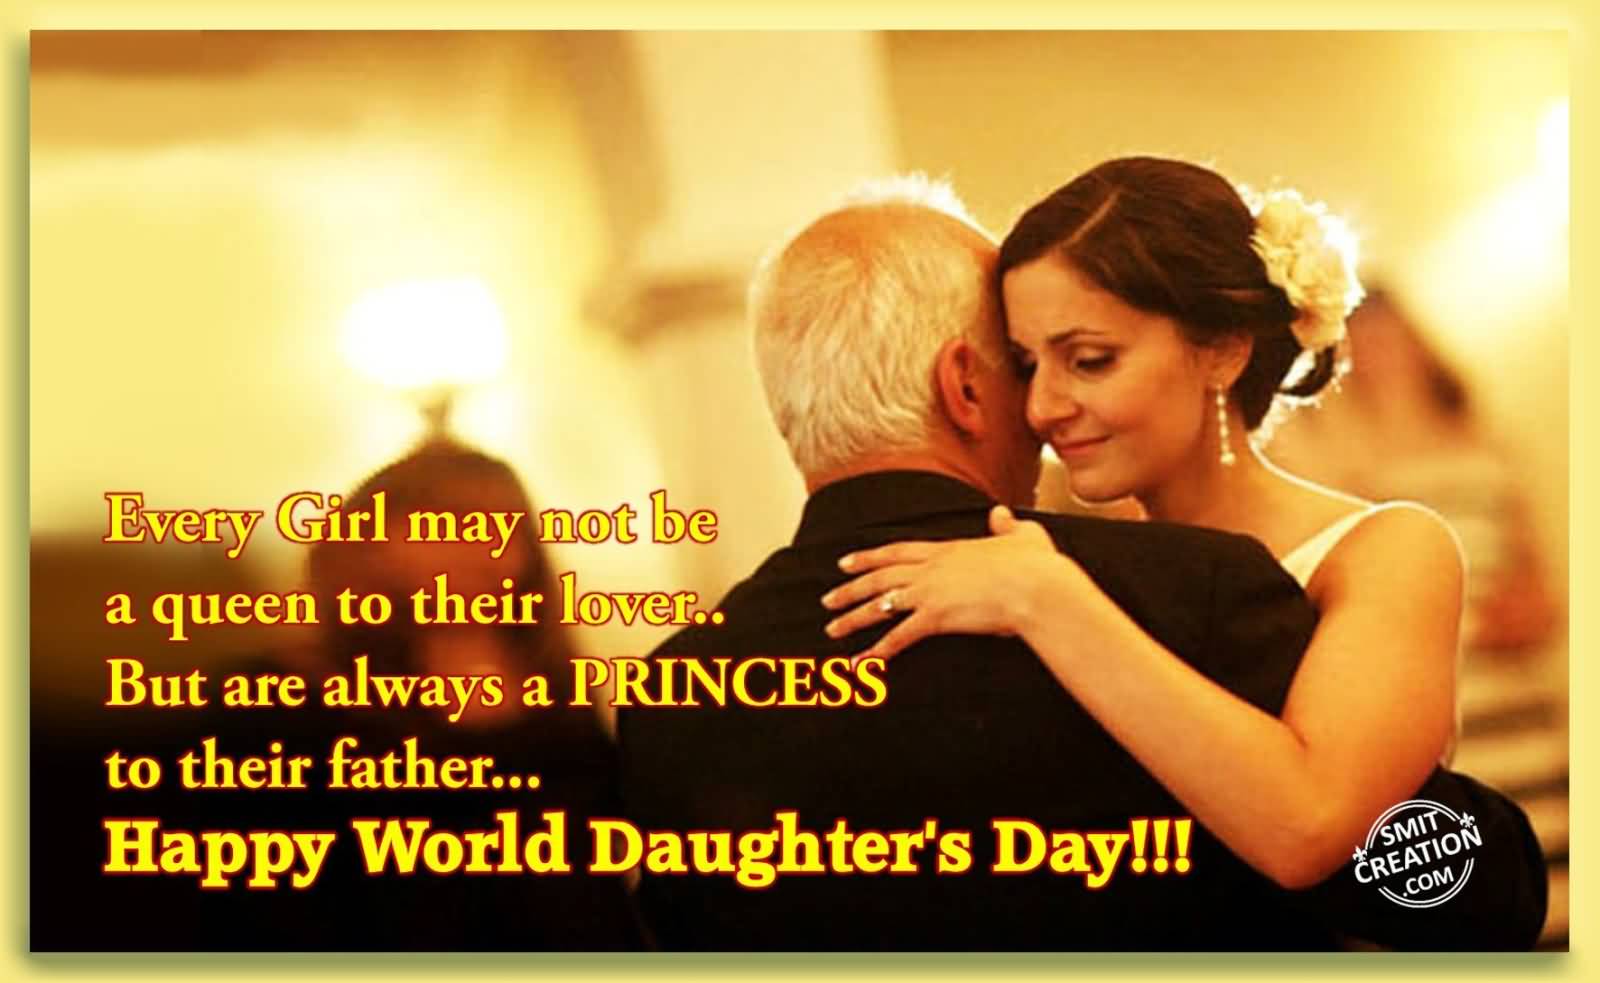 Happy World Daughter's Day